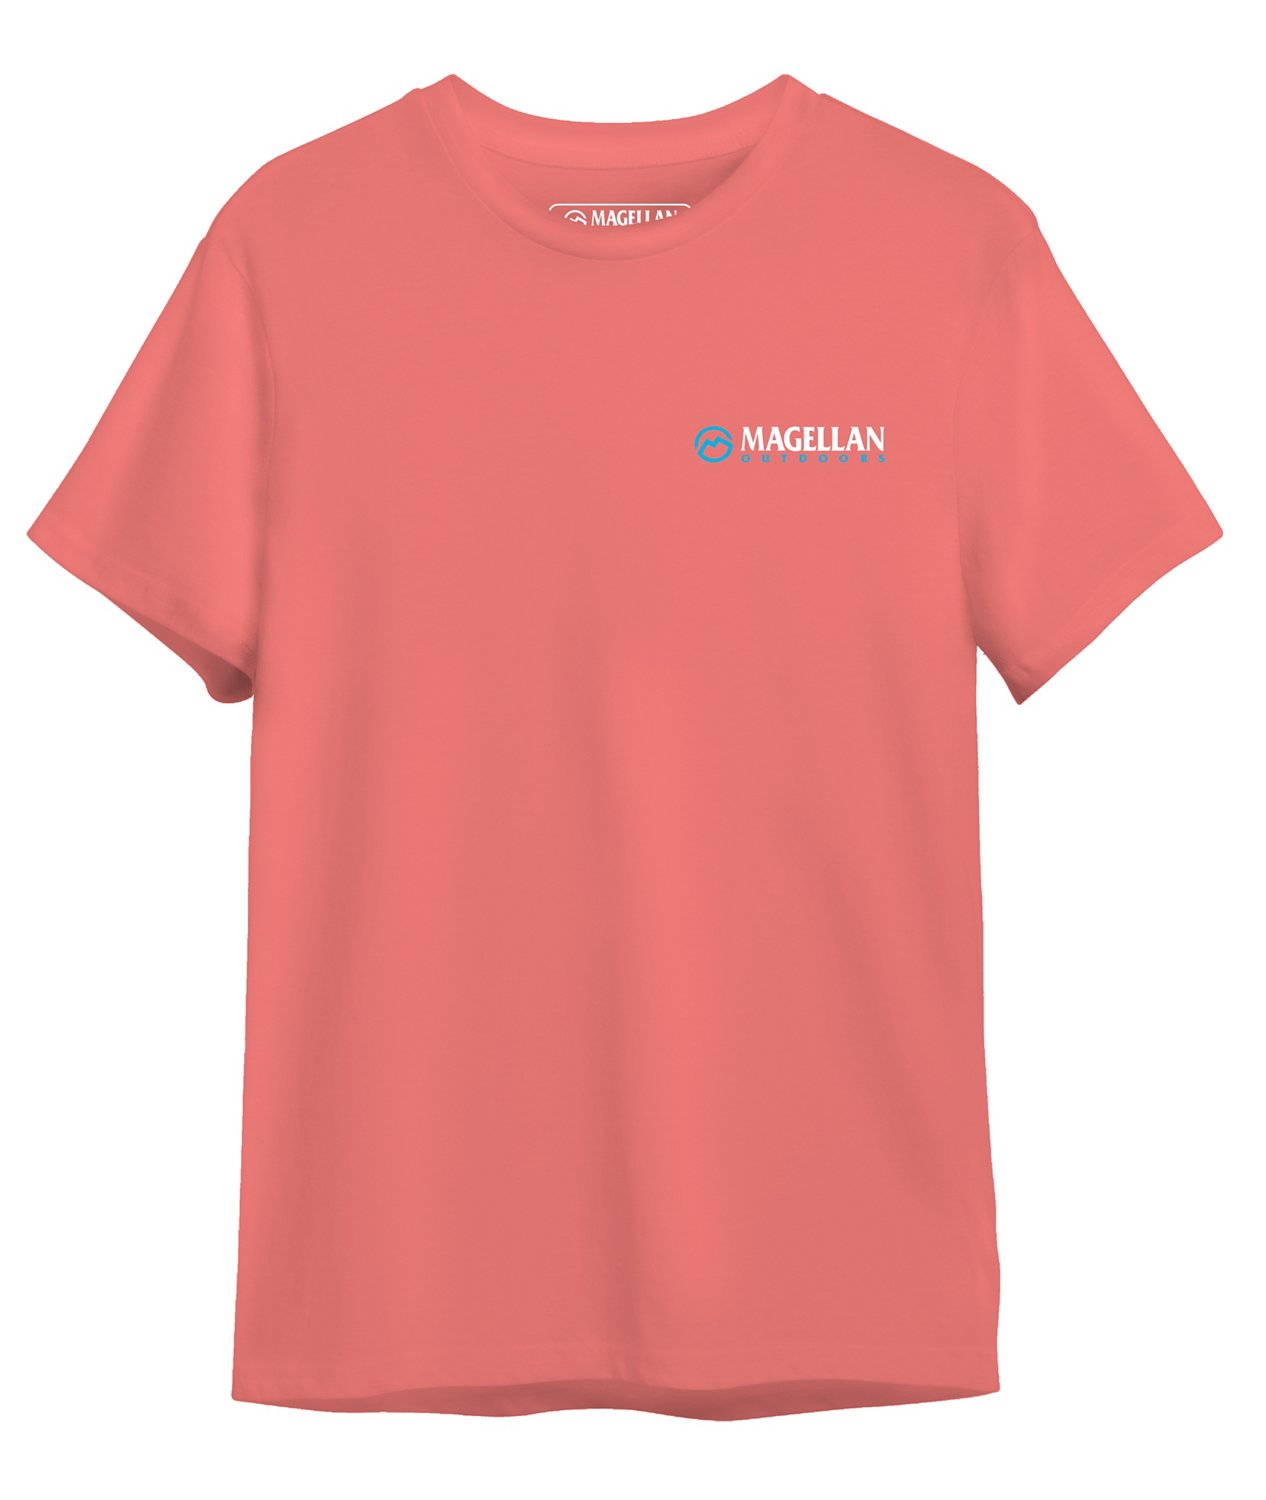 Magellan Boys Short Sleeve Tops, Shirts & T-Shirts for Boys for sale